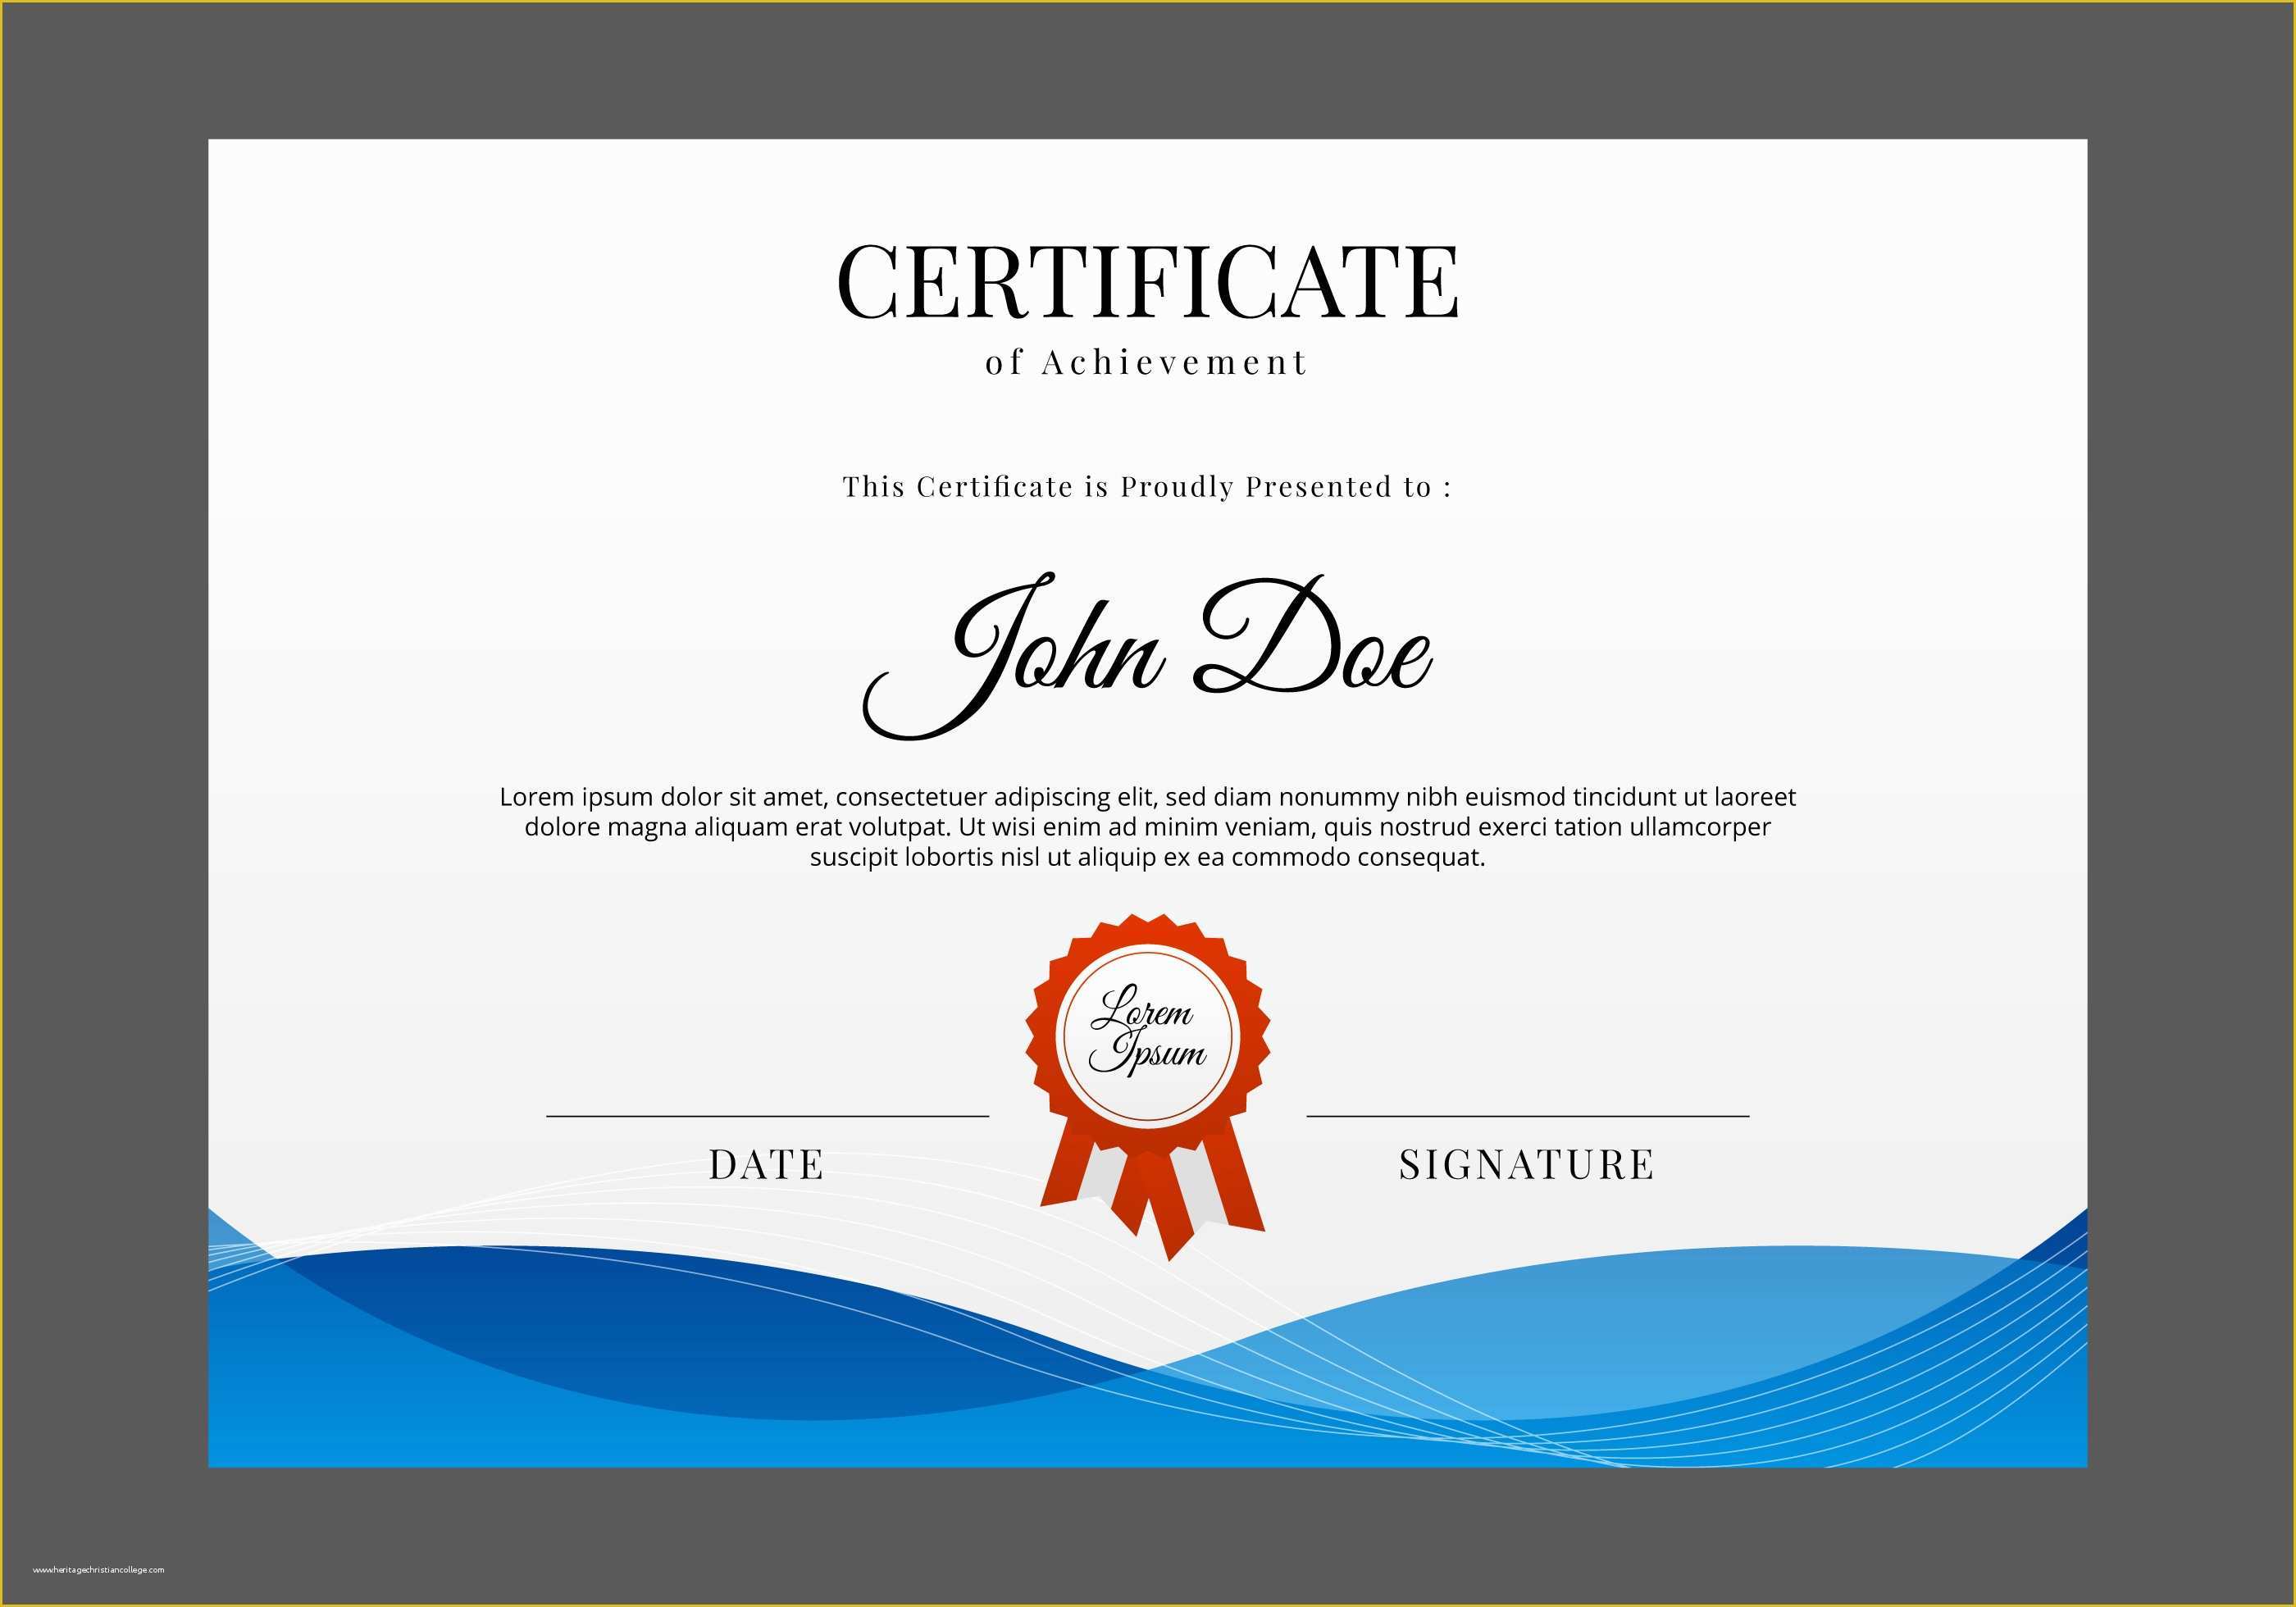 Free Diploma Templates Of Certificate Template Free Vector Art Free Downloads